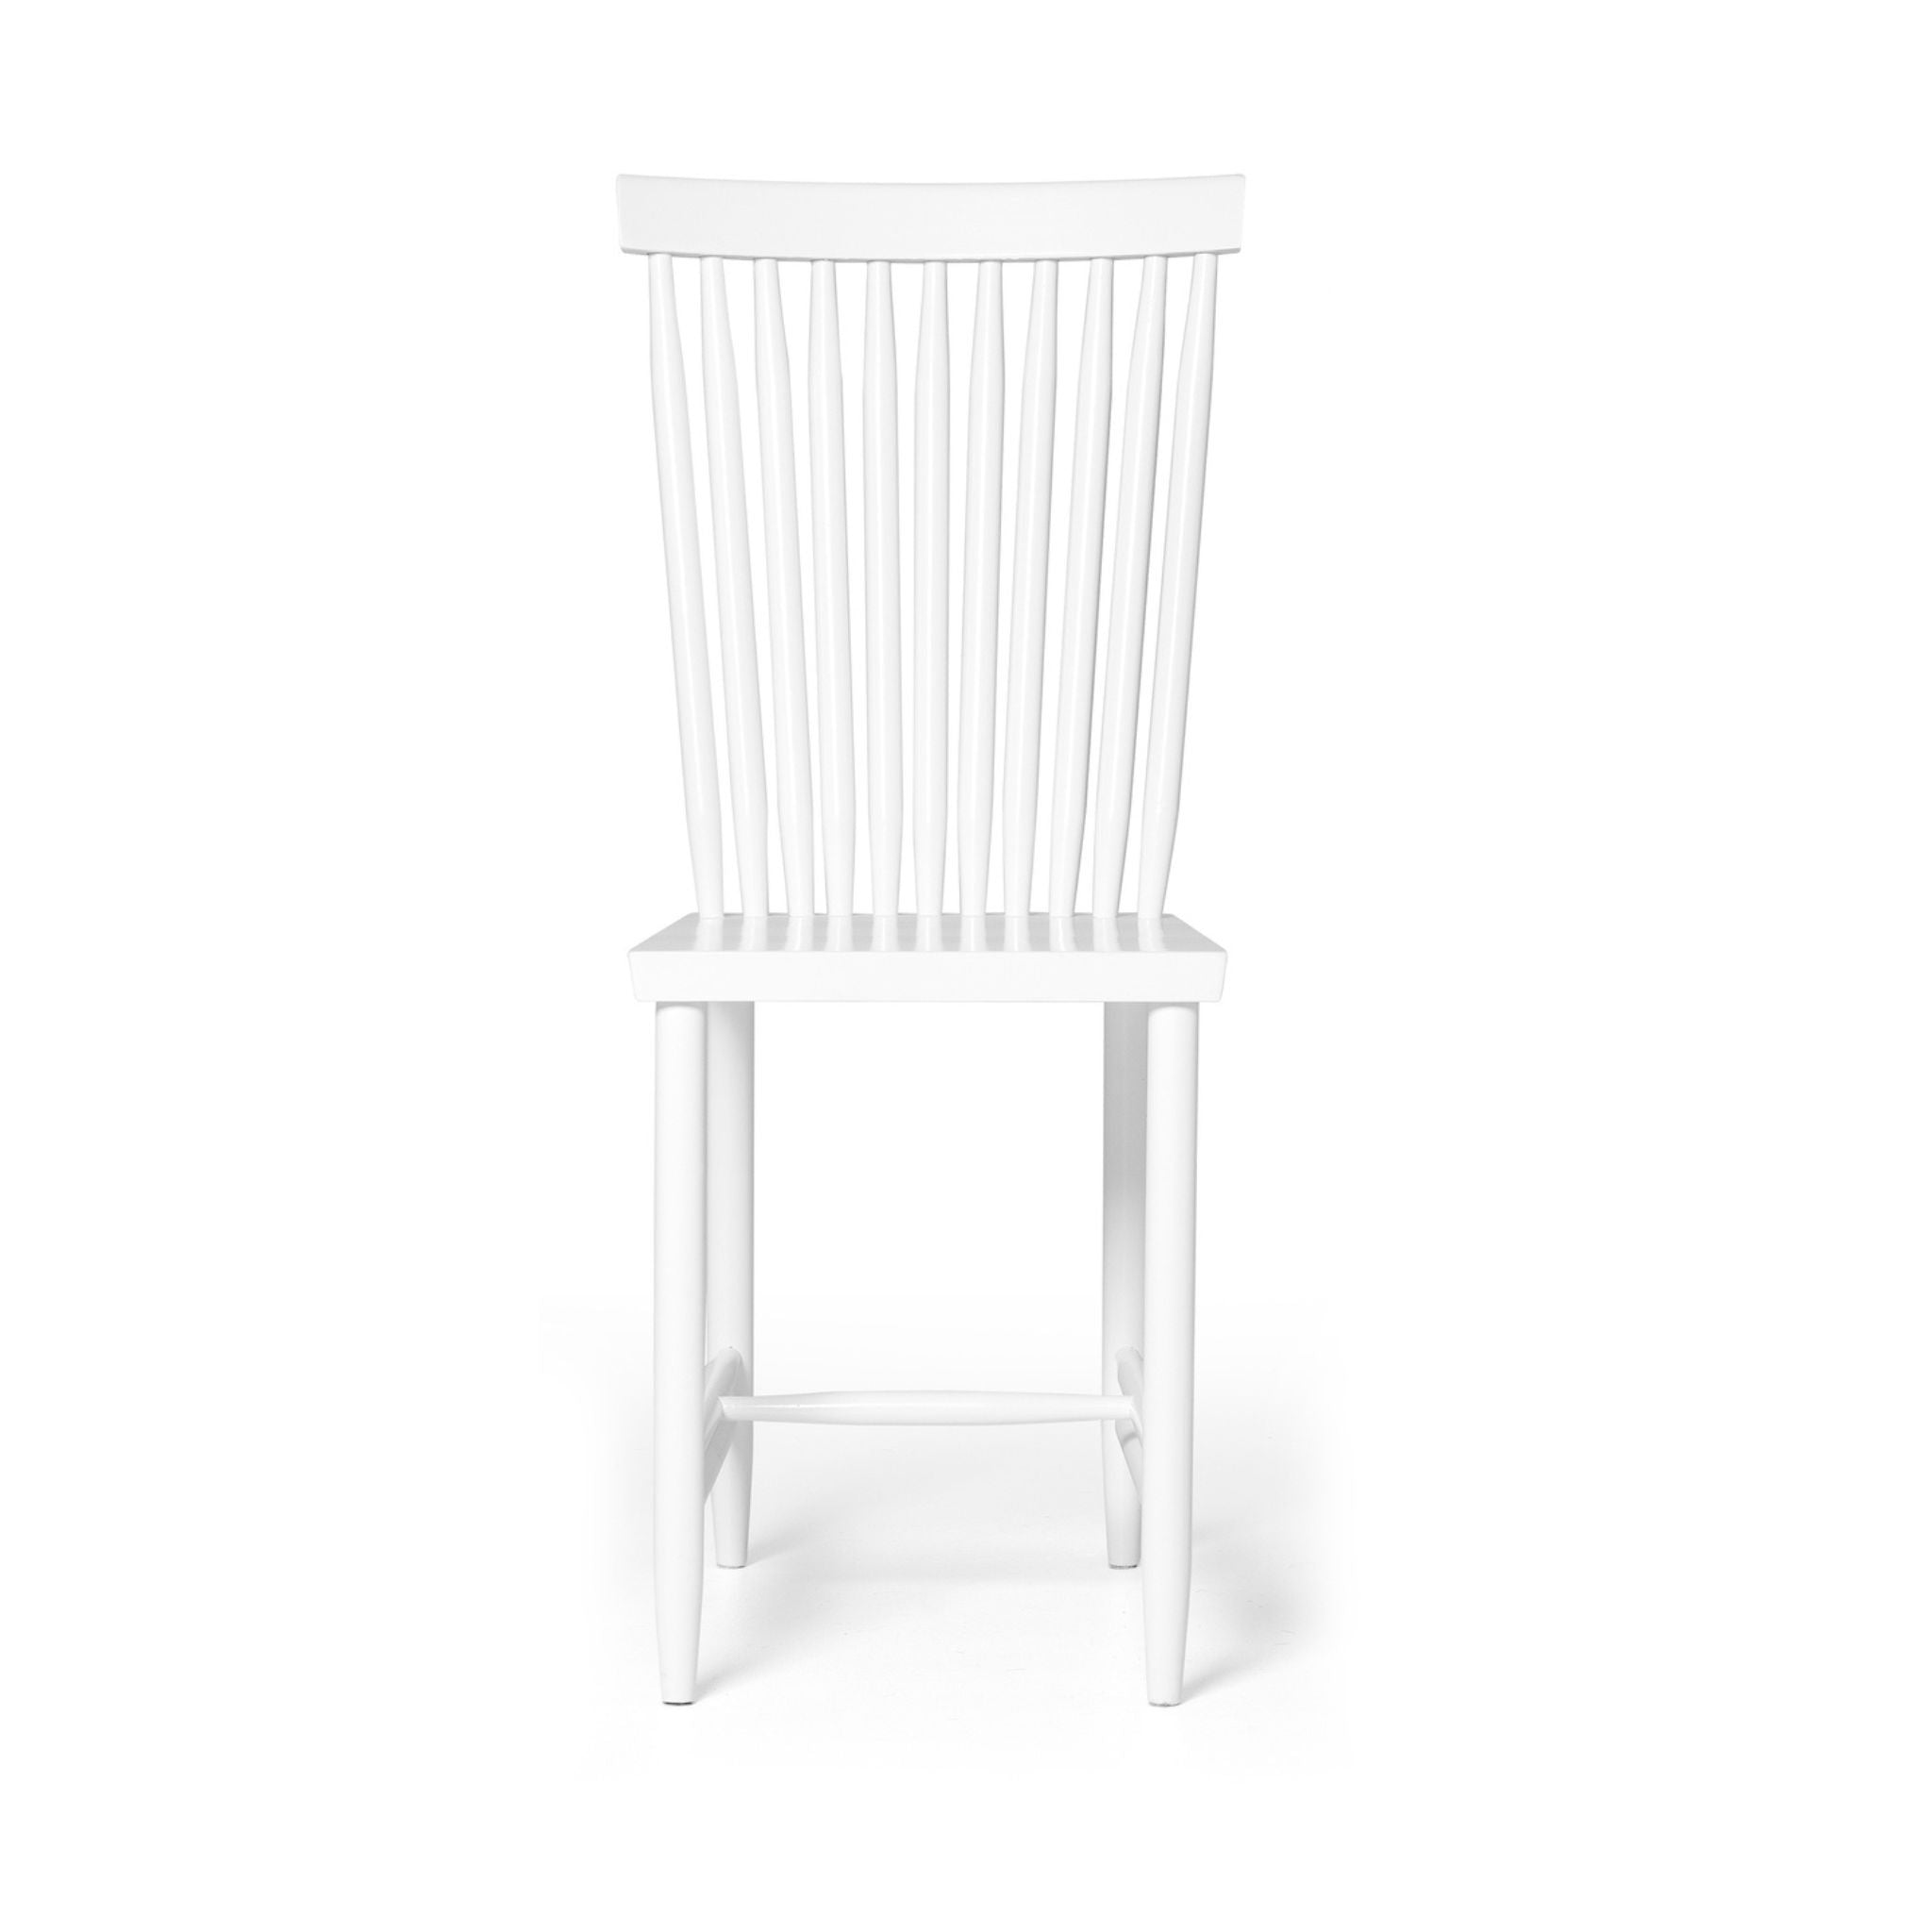 Family Chair No.2 - Valley Variety